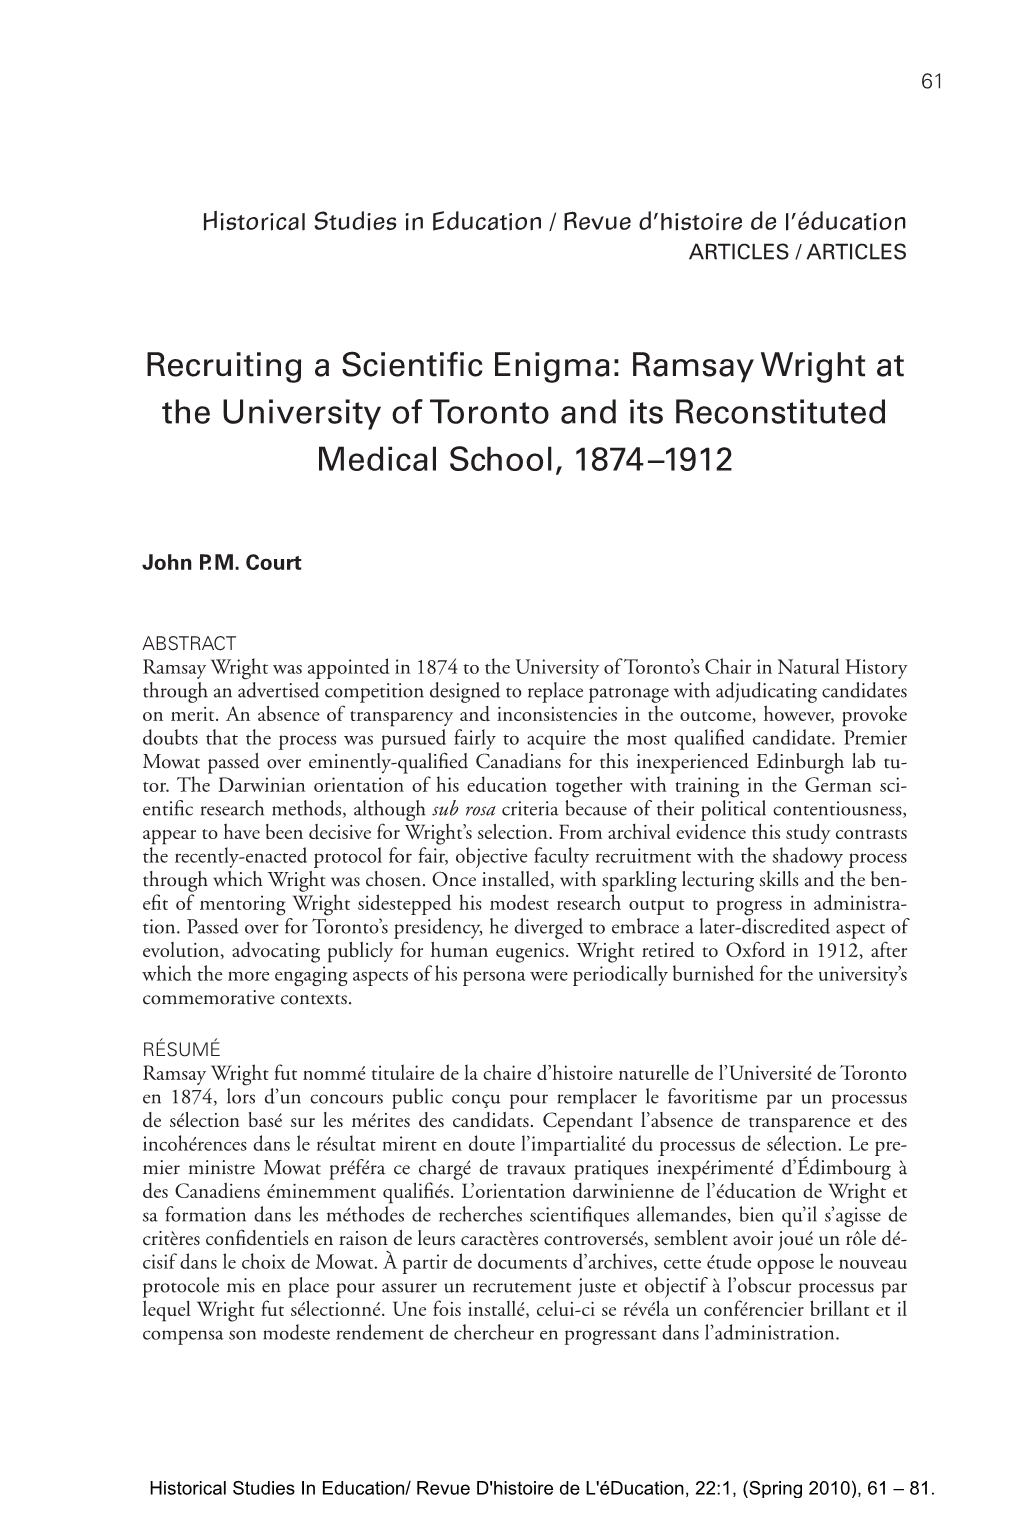 Recruiting a Scientific Enigma: Ramsay Wright at the University of Toronto and Its Reconstituted Medical School, 1874–1912